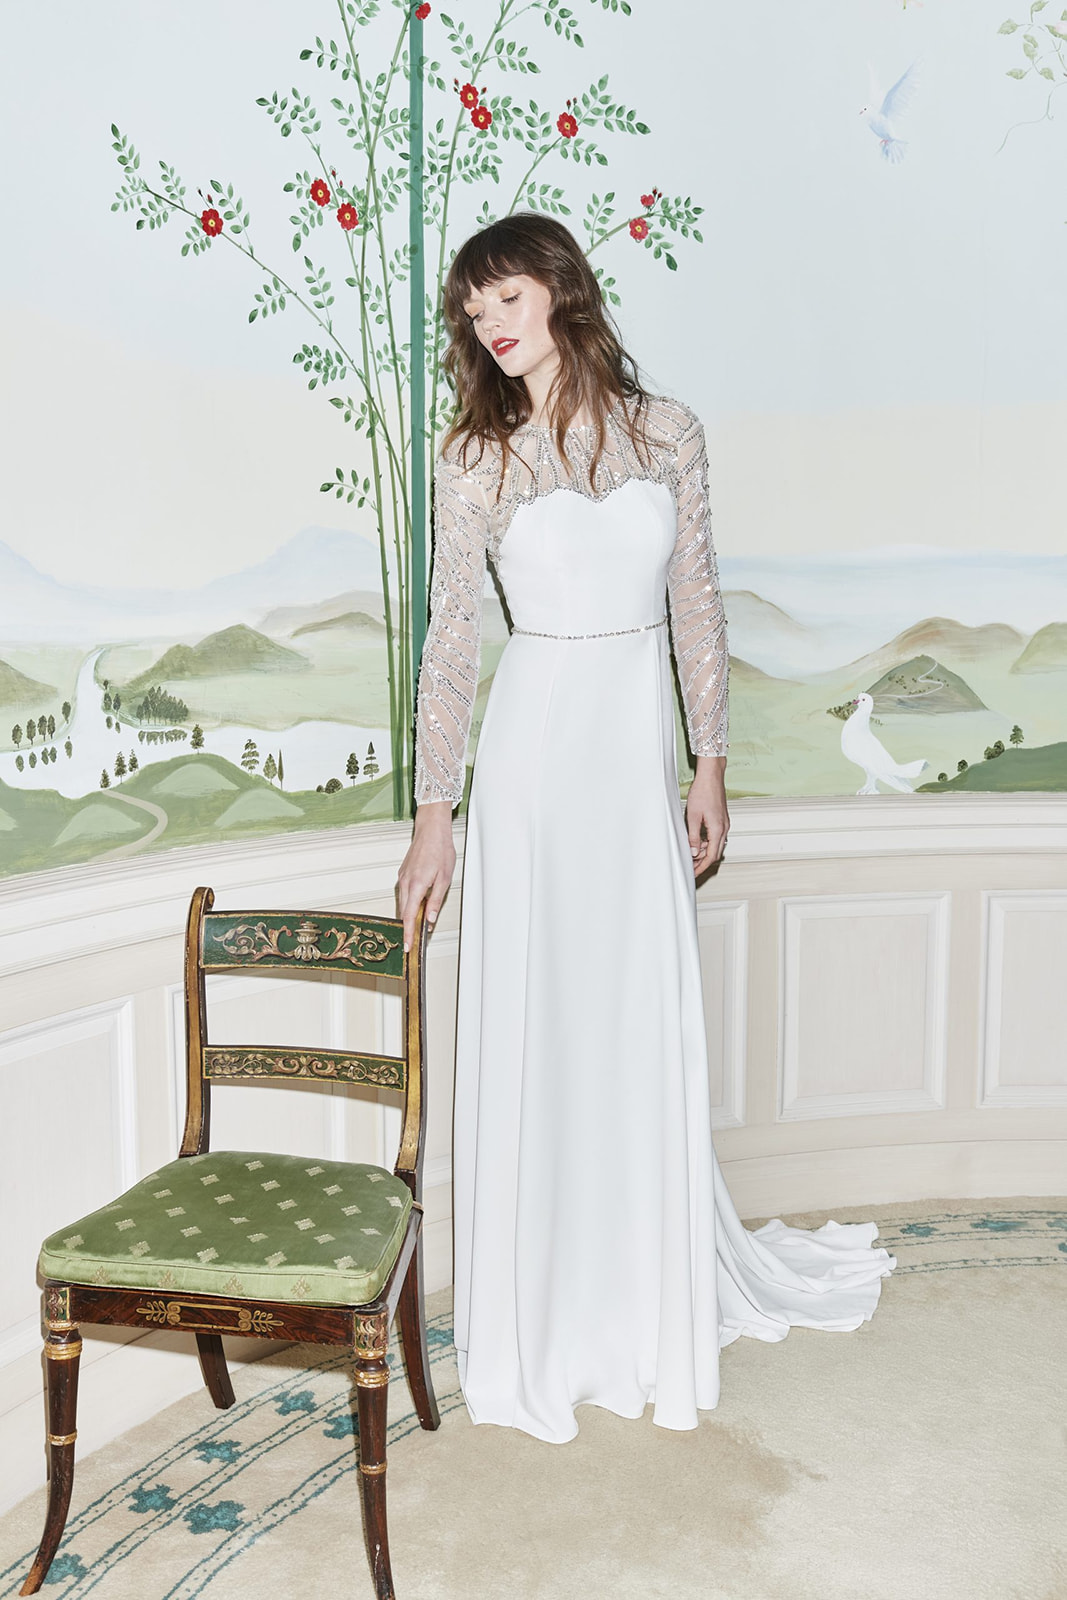 Jenny Packham Bridal: With flowing fabrics, intricate embellishments, and romantic silhouettes.